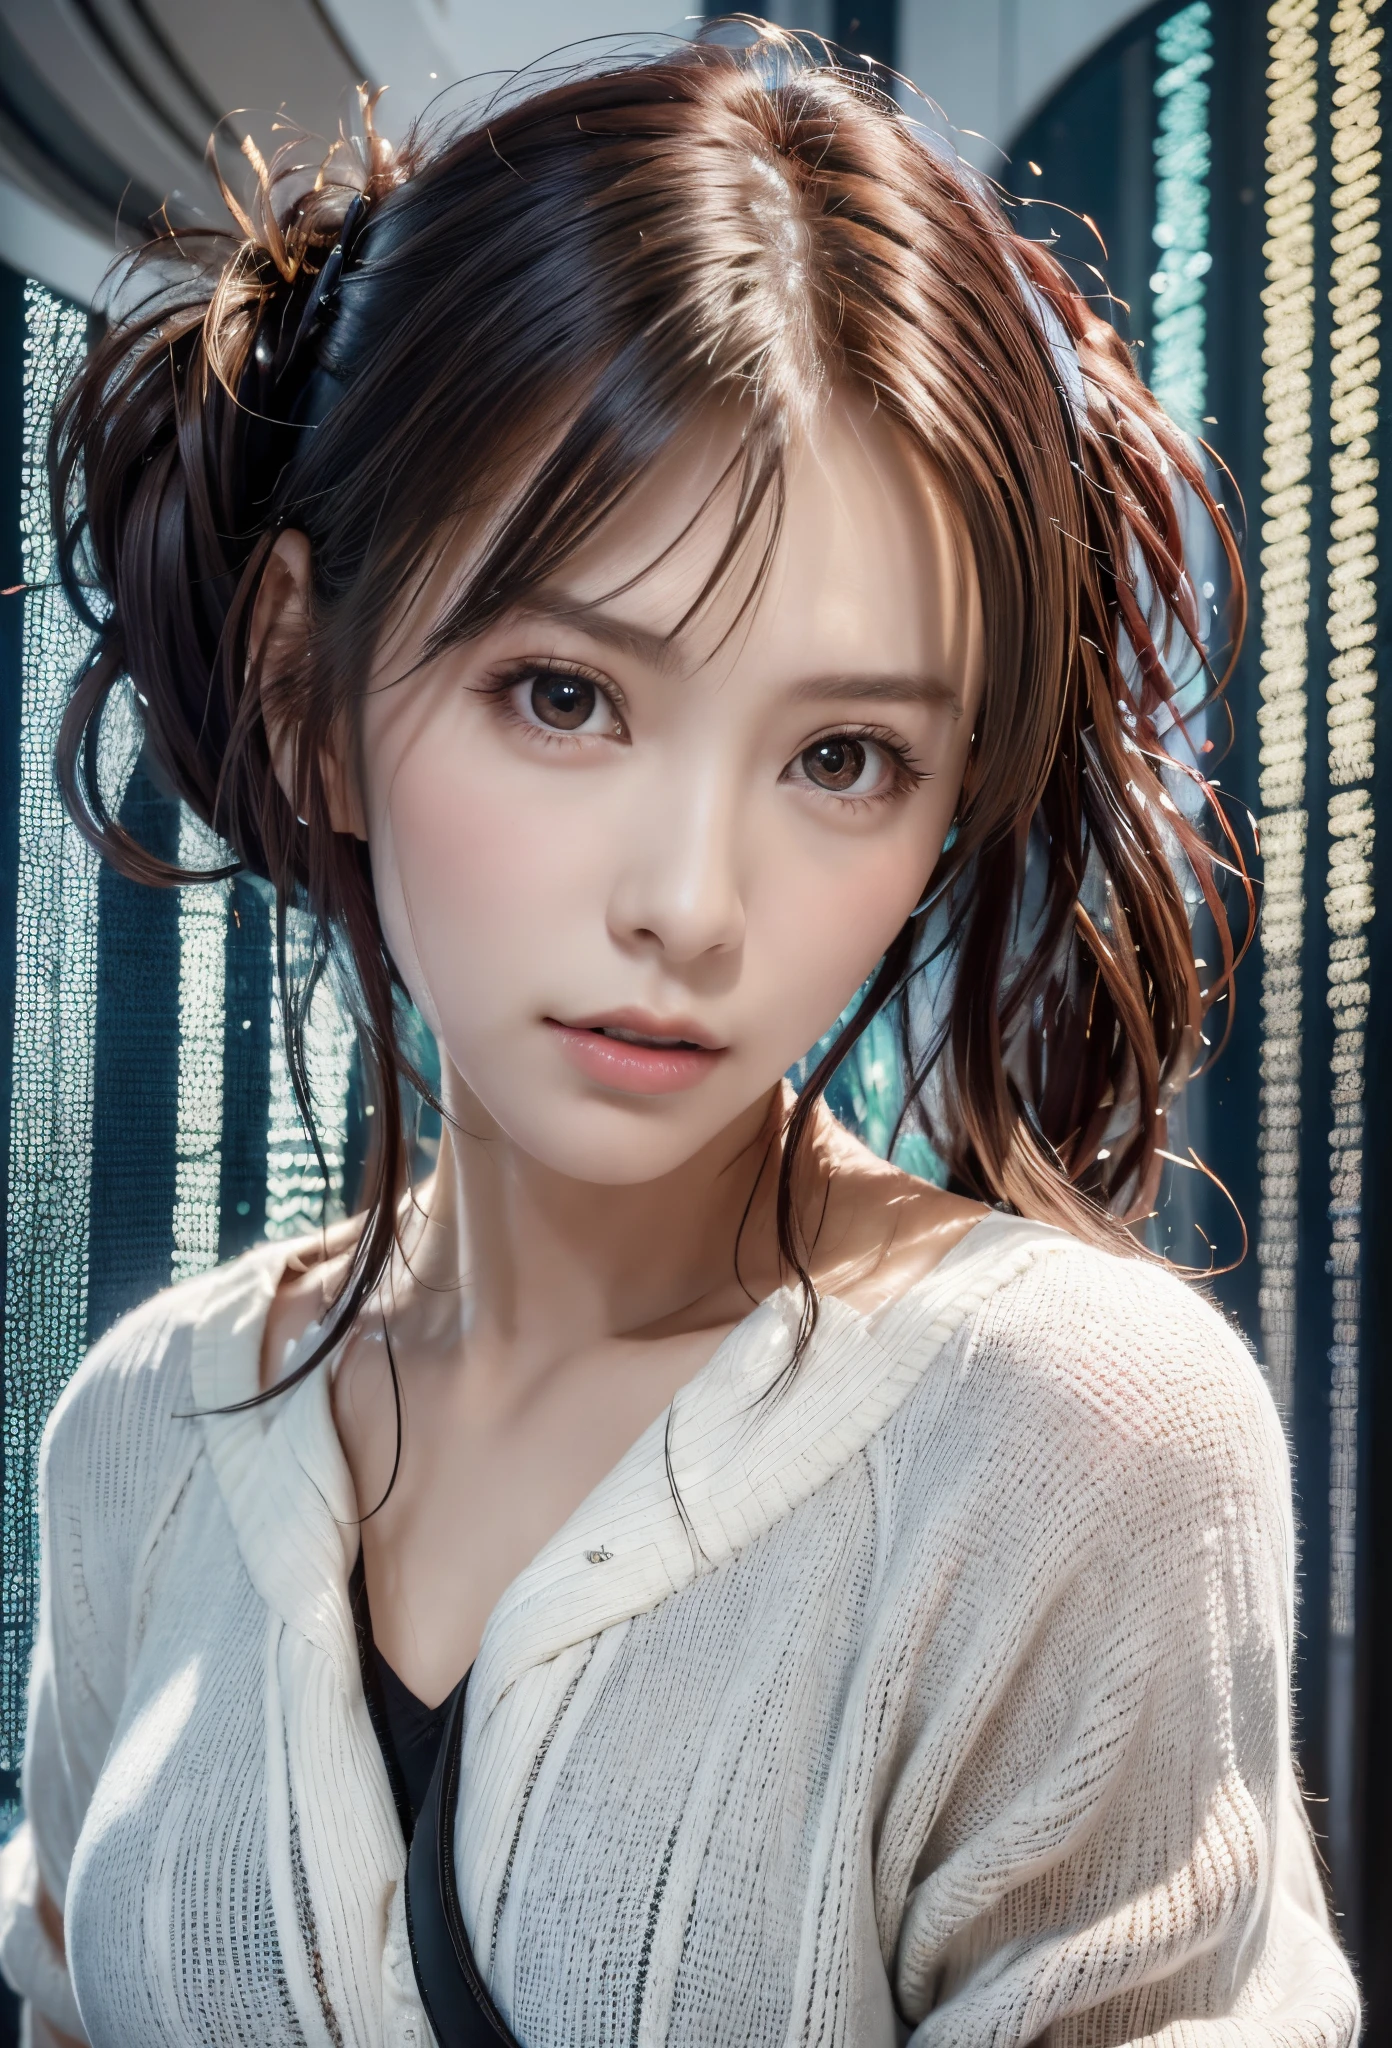 8K, of the highest quality, masutepiece:1.2), (Realistic, Photorealsitic:1.37), of the highest quality, masutepiece, Beautiful young woman, Pensive expression,、A charming、and an inviting look, Oversized knitwear、Hair tied back, Cinematic background, Light skin tone、Ko Shibasaki